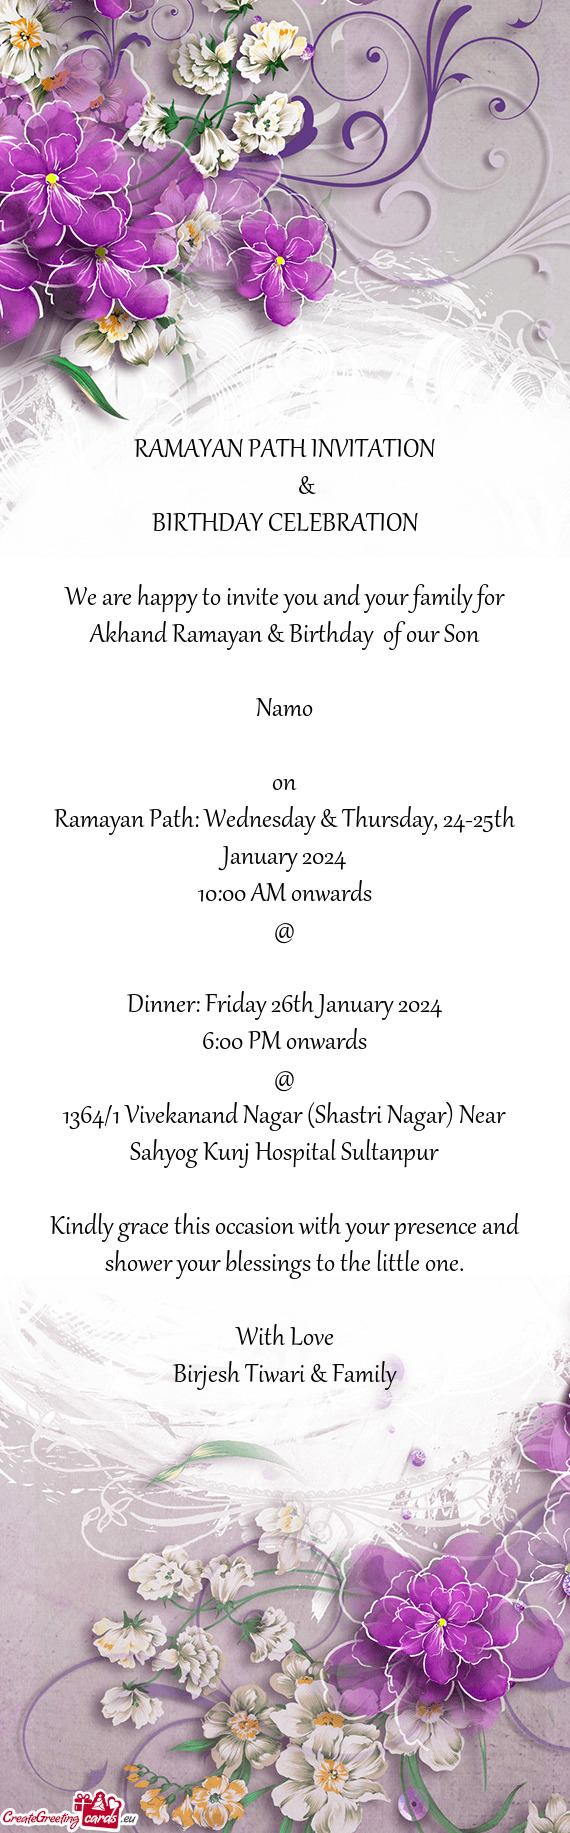 We are happy to invite you and your family for Akhand Ramayan & Birthday of our Son